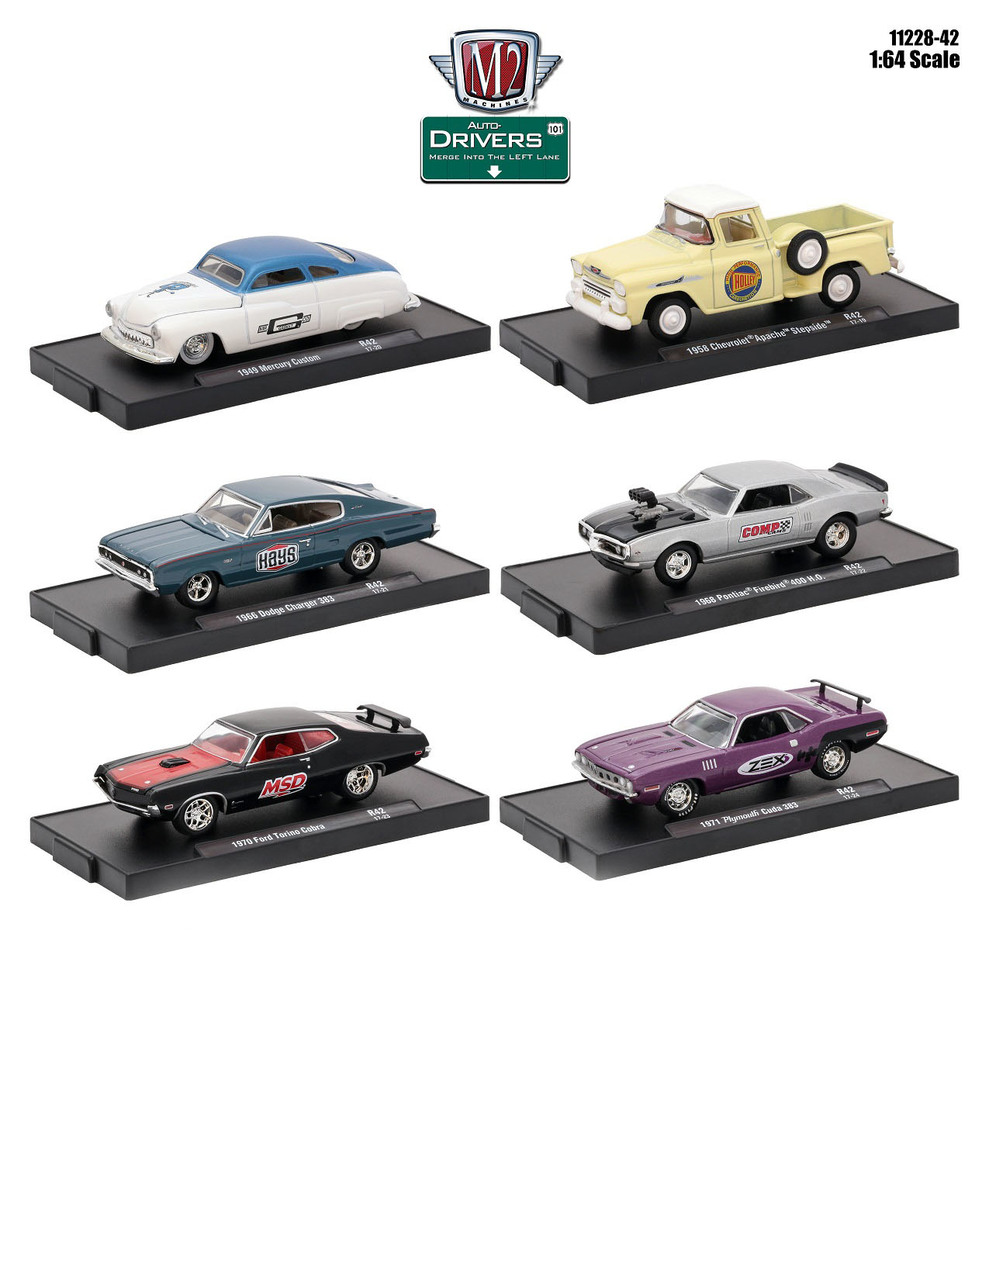 Drivers 6 Cars Set Release 42 In Blister Packs 1/64 Diecast Model Cars By M2 Machines